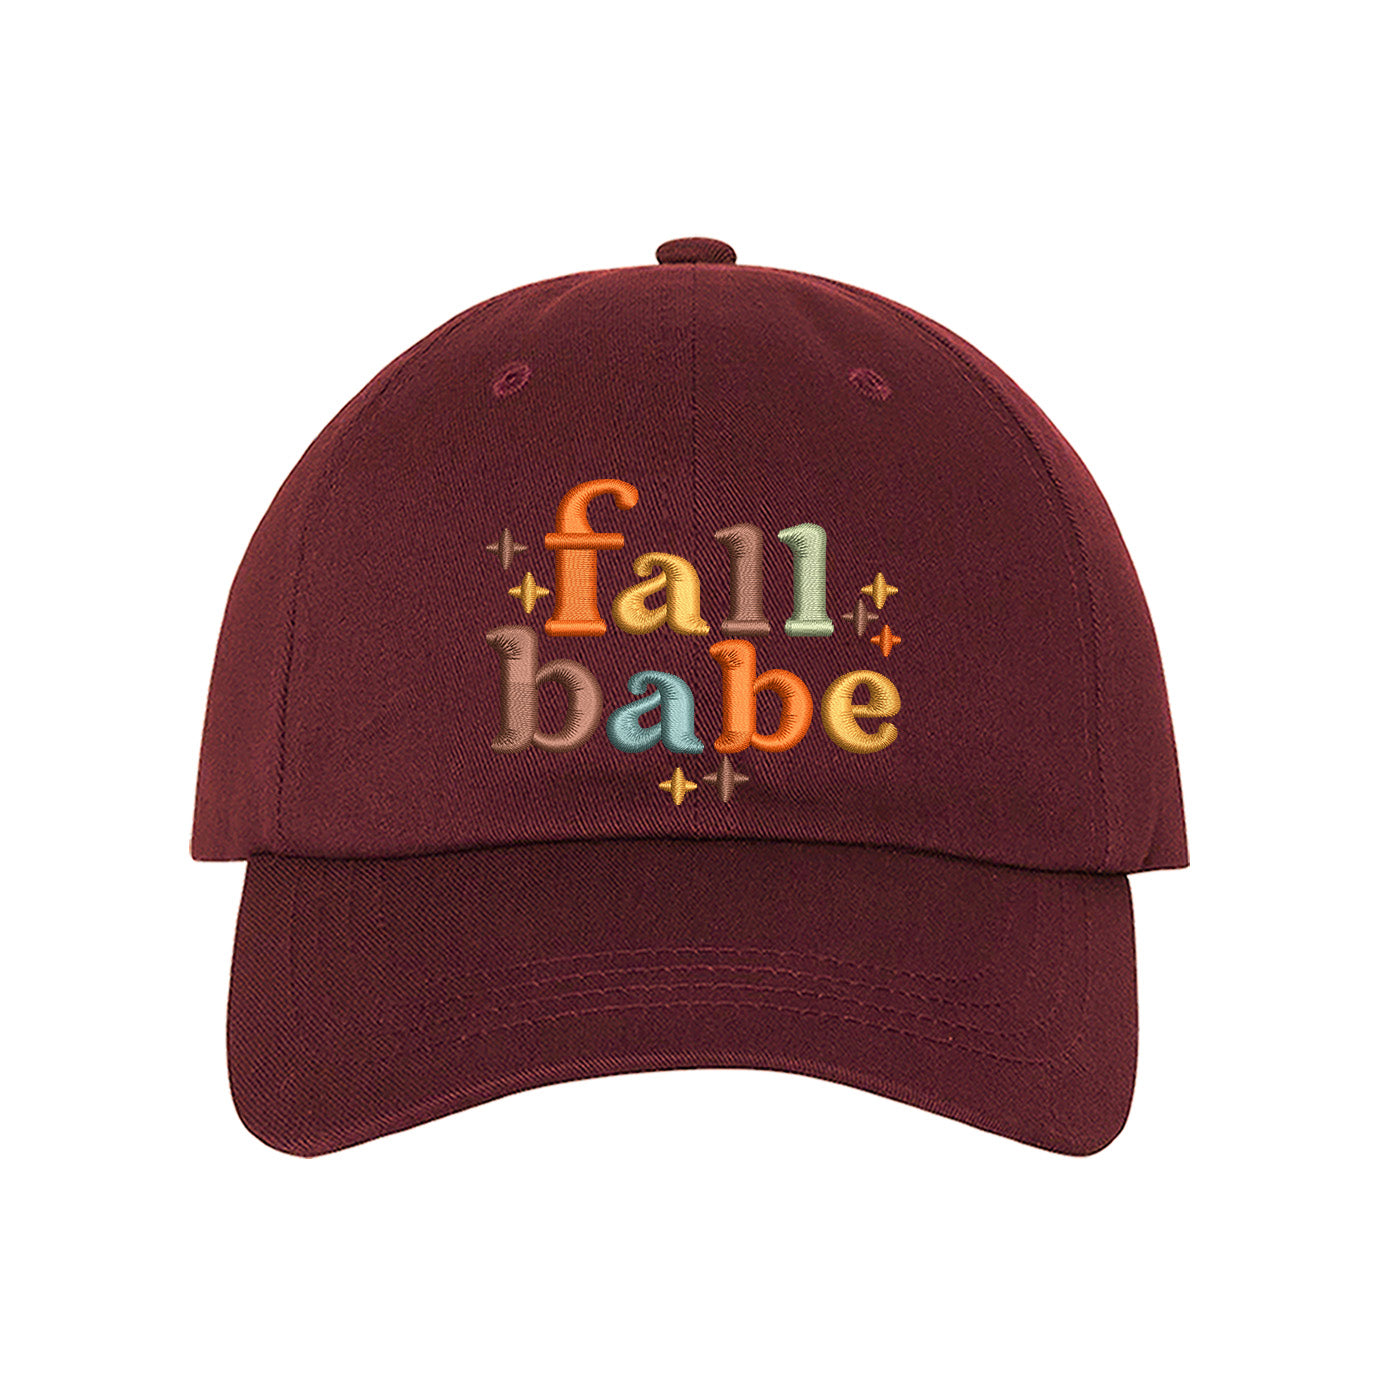 Burgundy Baseball cap embroidered with Fall Babe - DSY Lifestyle